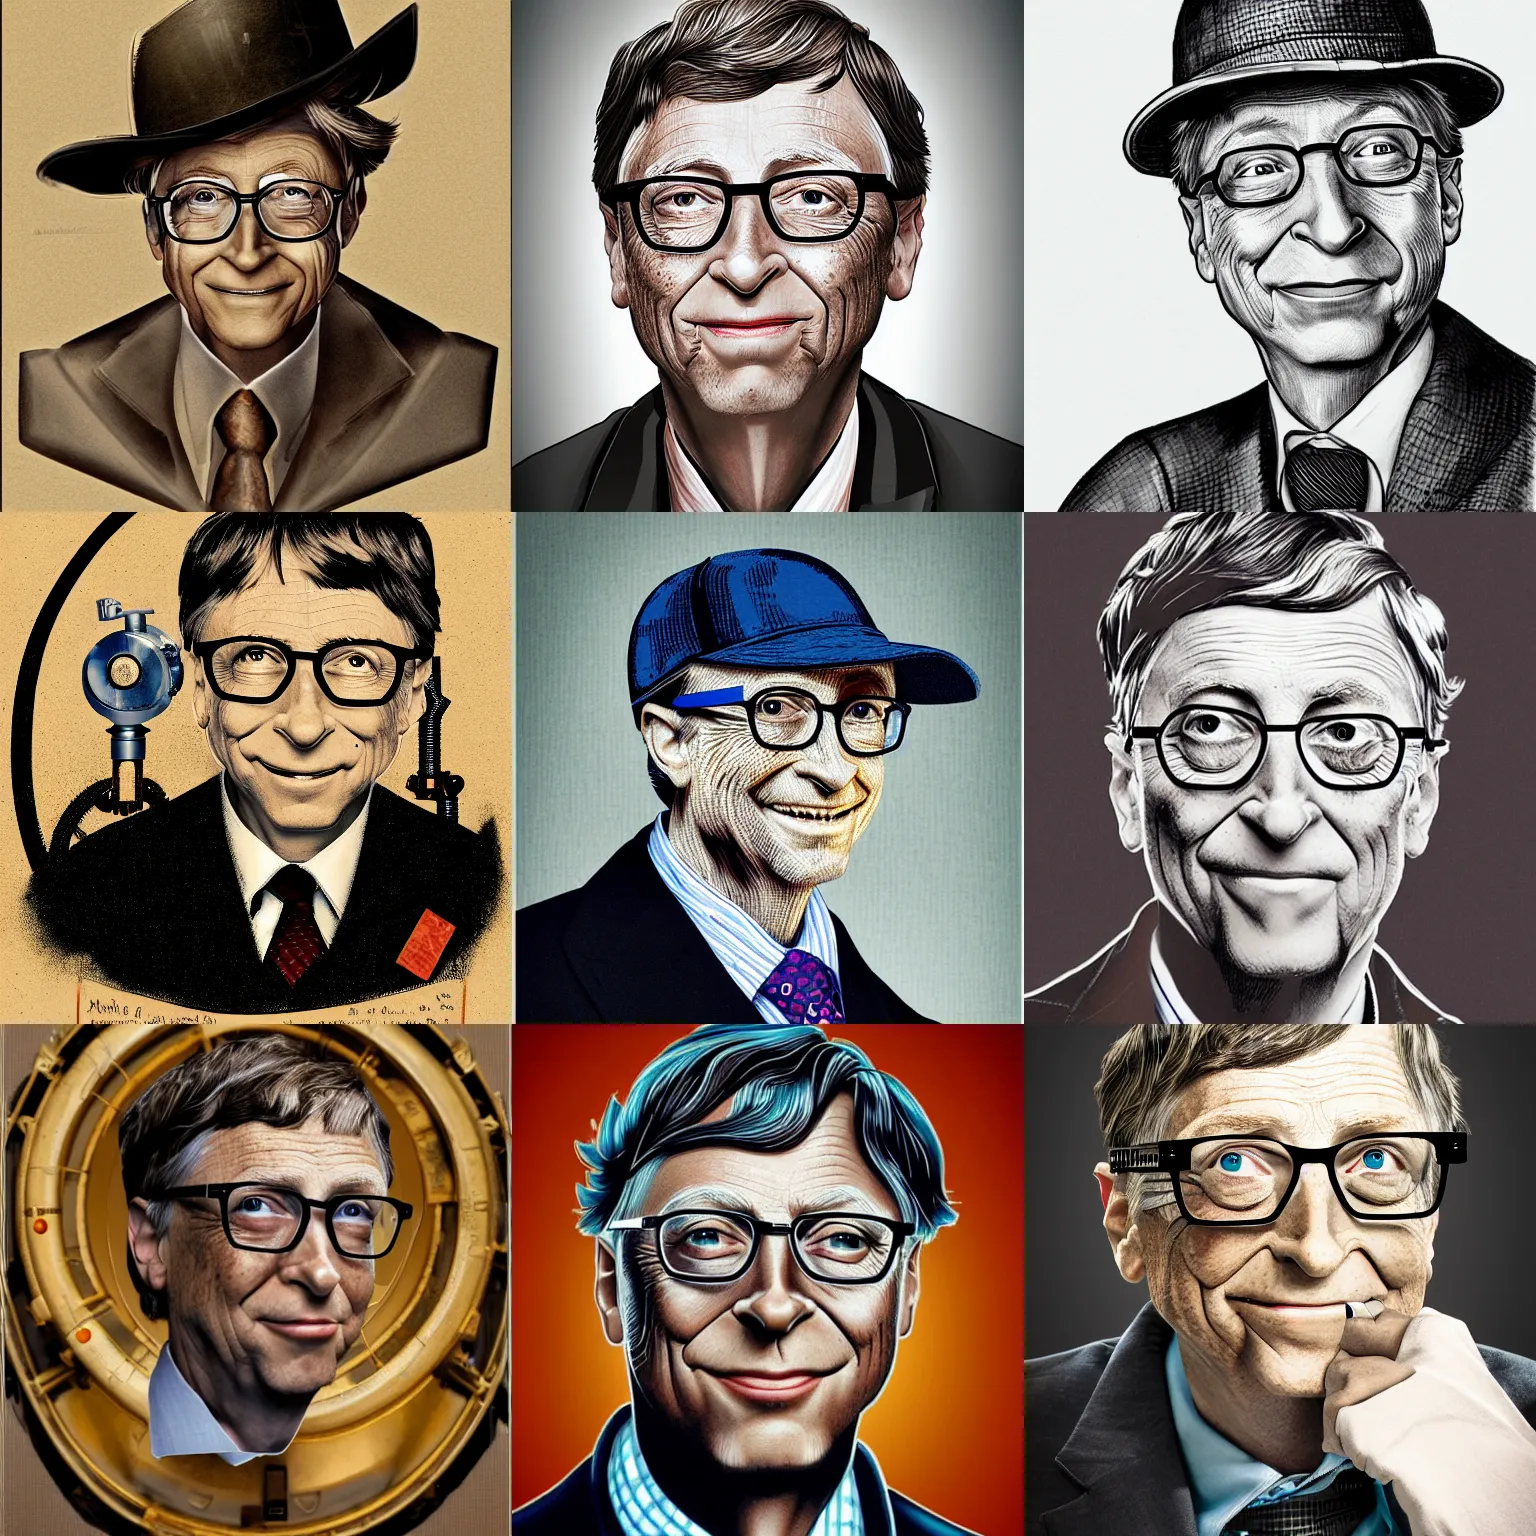 Prompt: a portrait of robotic bill gates, in the style of steampunk